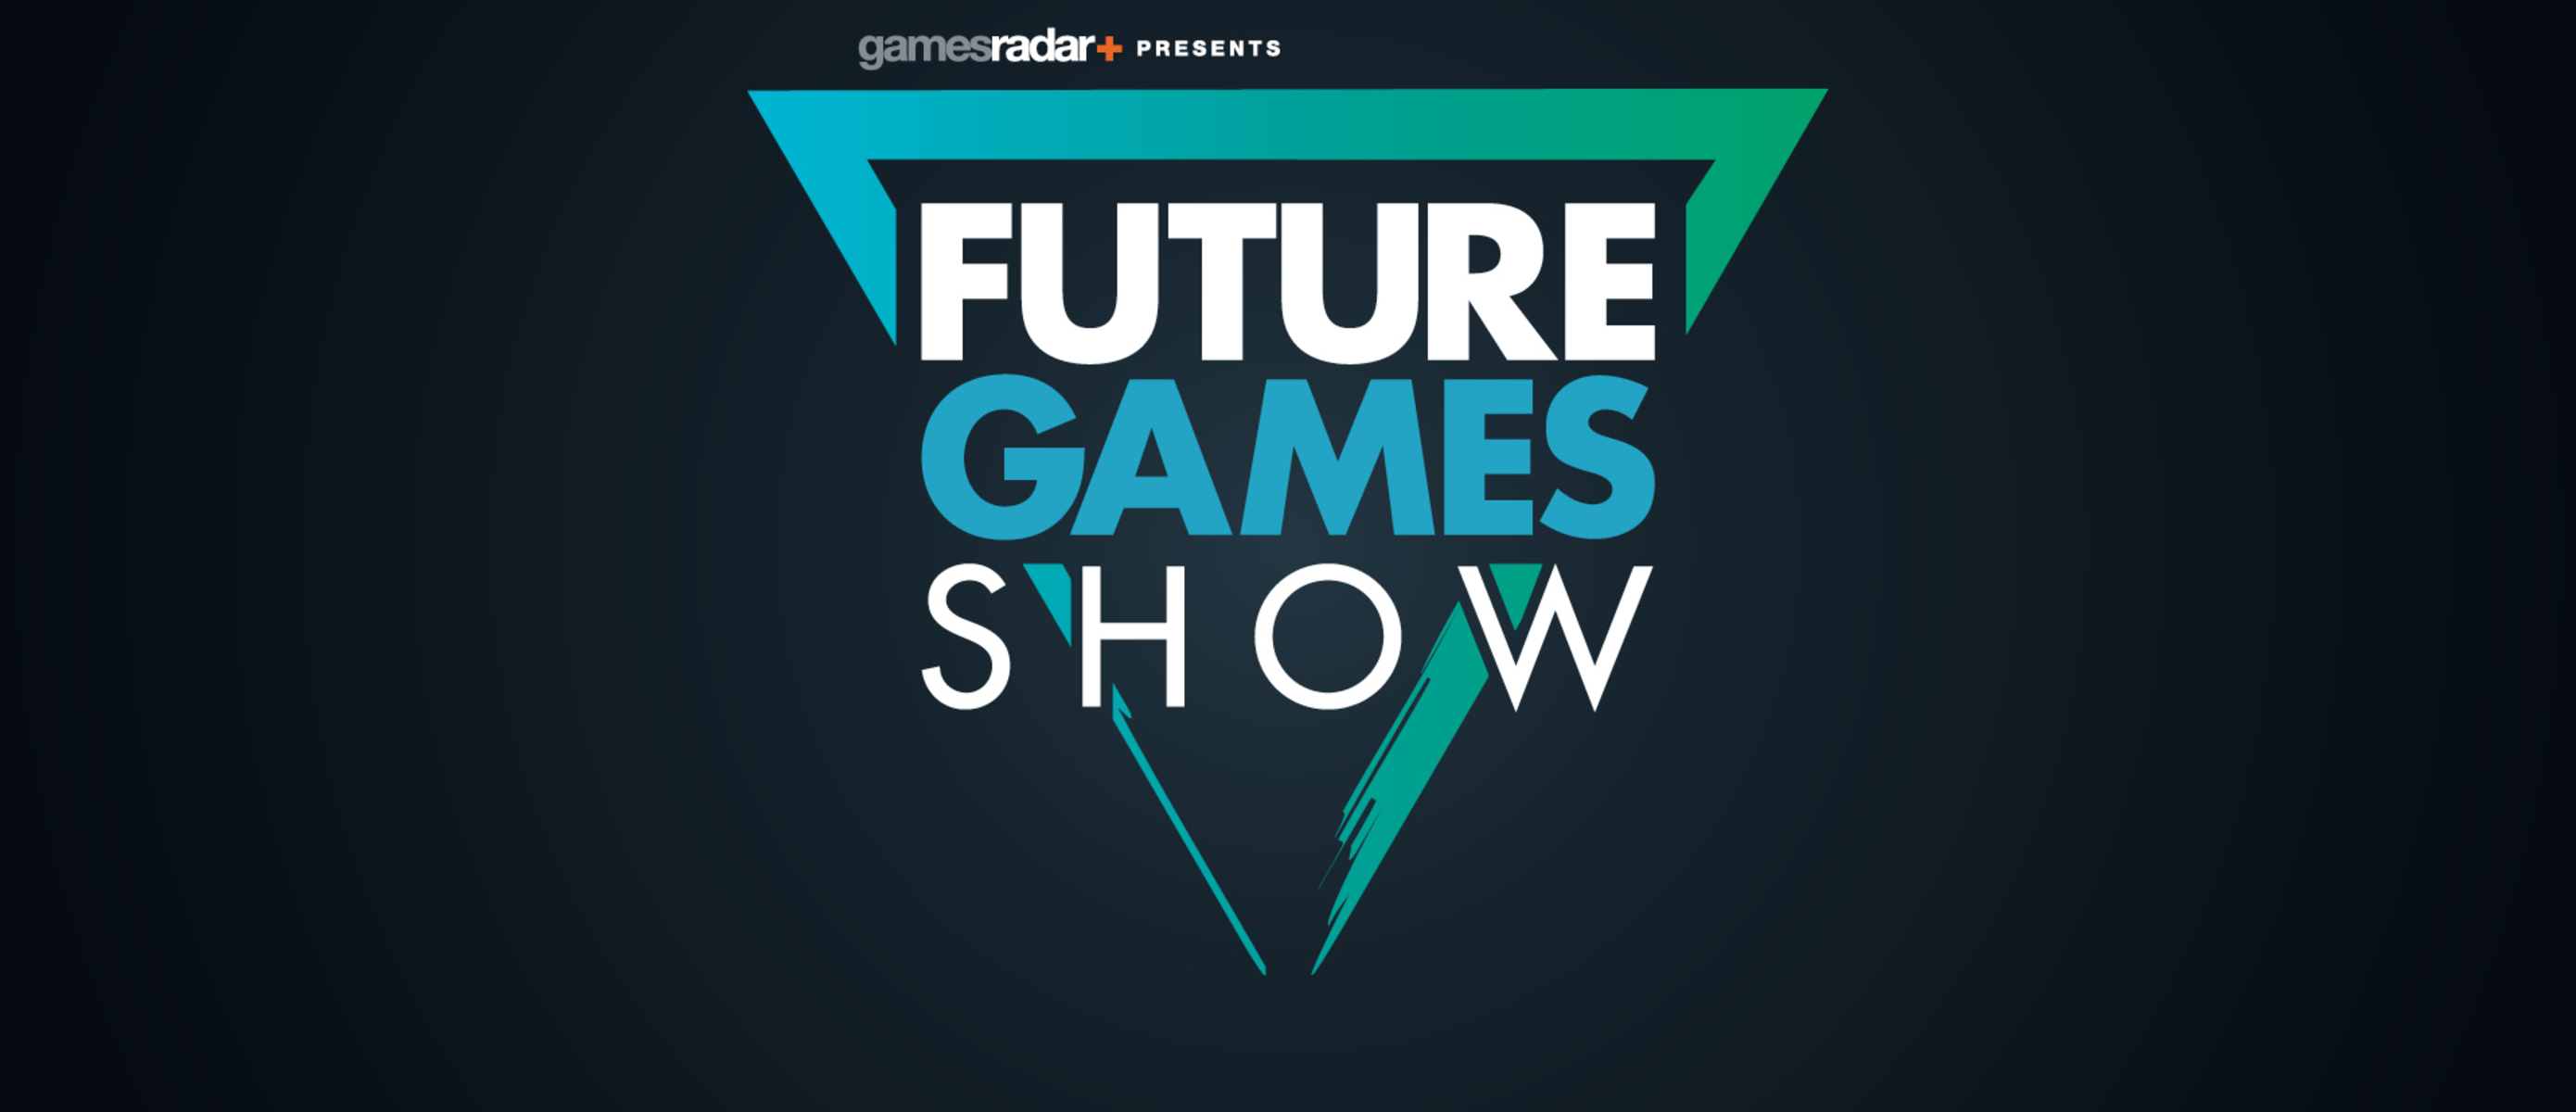 Future gaming show. Future games show. Games of Future. Future Gaming. Game show.